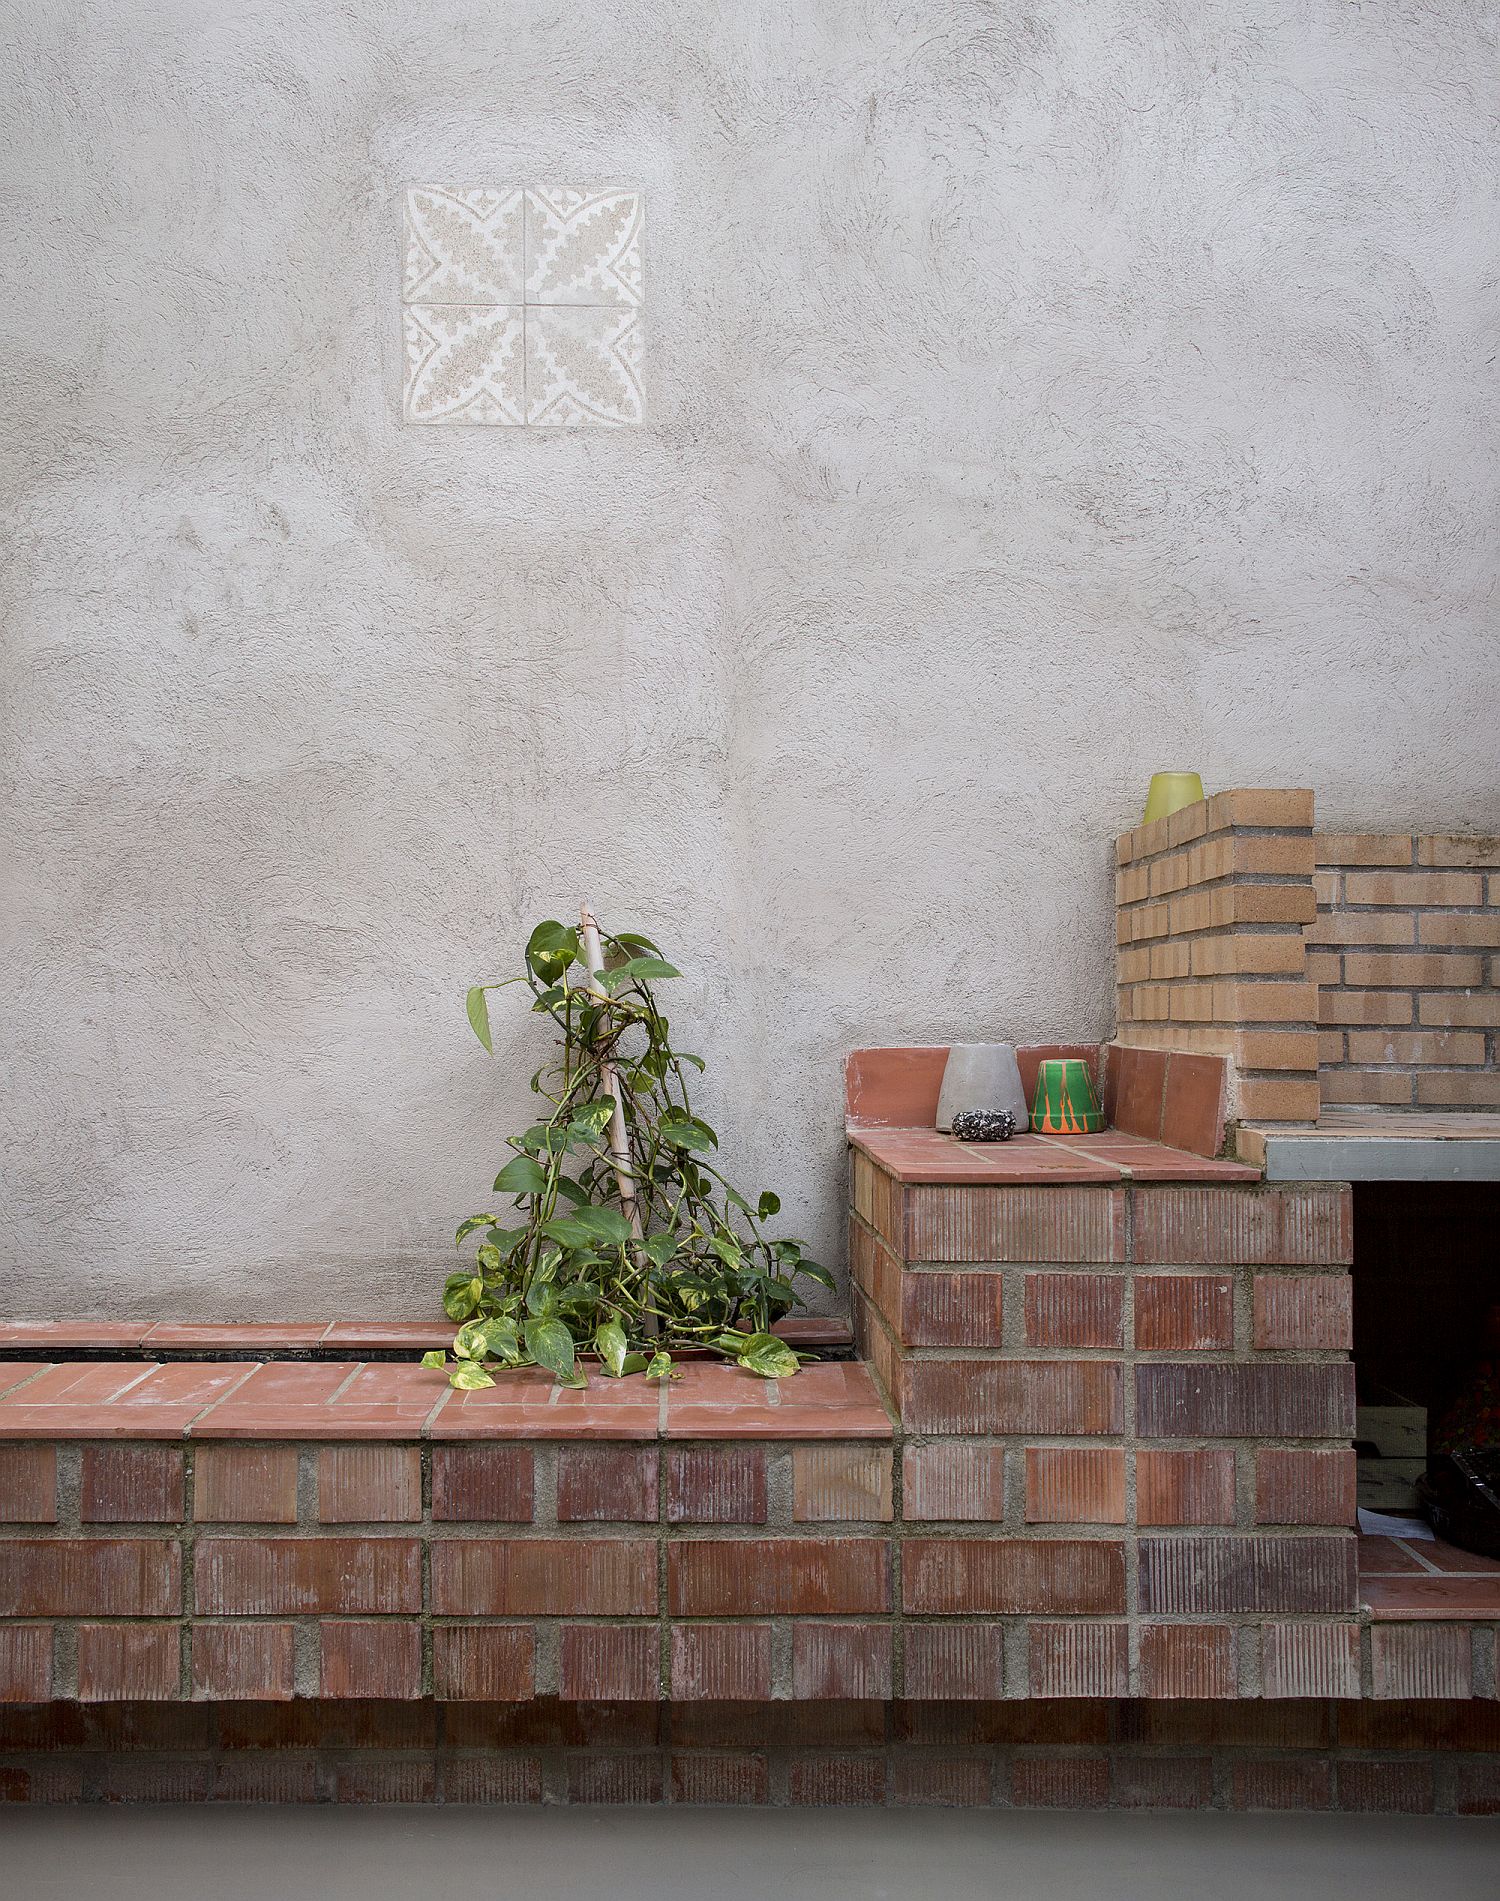 Brick walled sections give the interior ample textural contrast